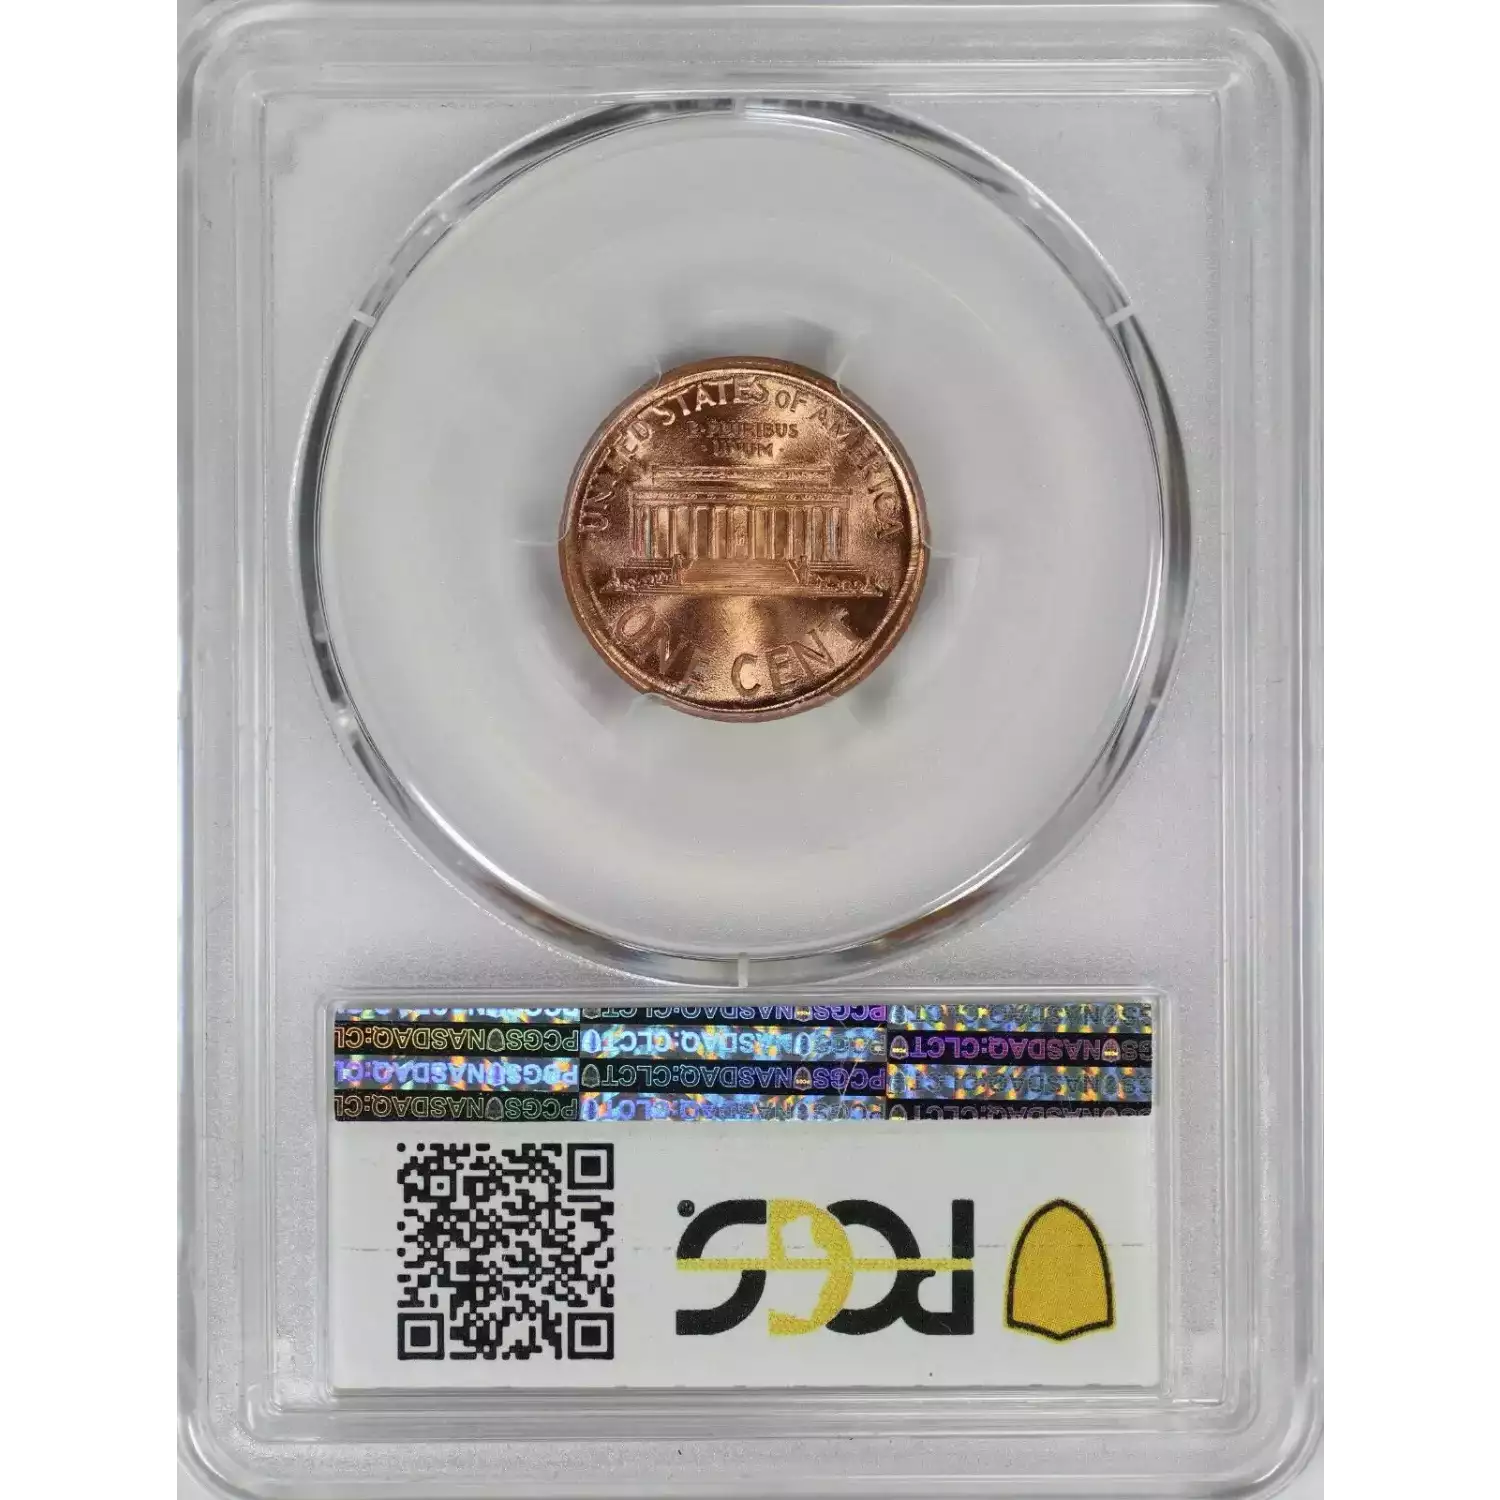 1999-PHILADELPHIA Small Cents Lincoln, Memorial Reverse PCGS MS-67 RD BROAD  STRUCK - Kearney Coin Center